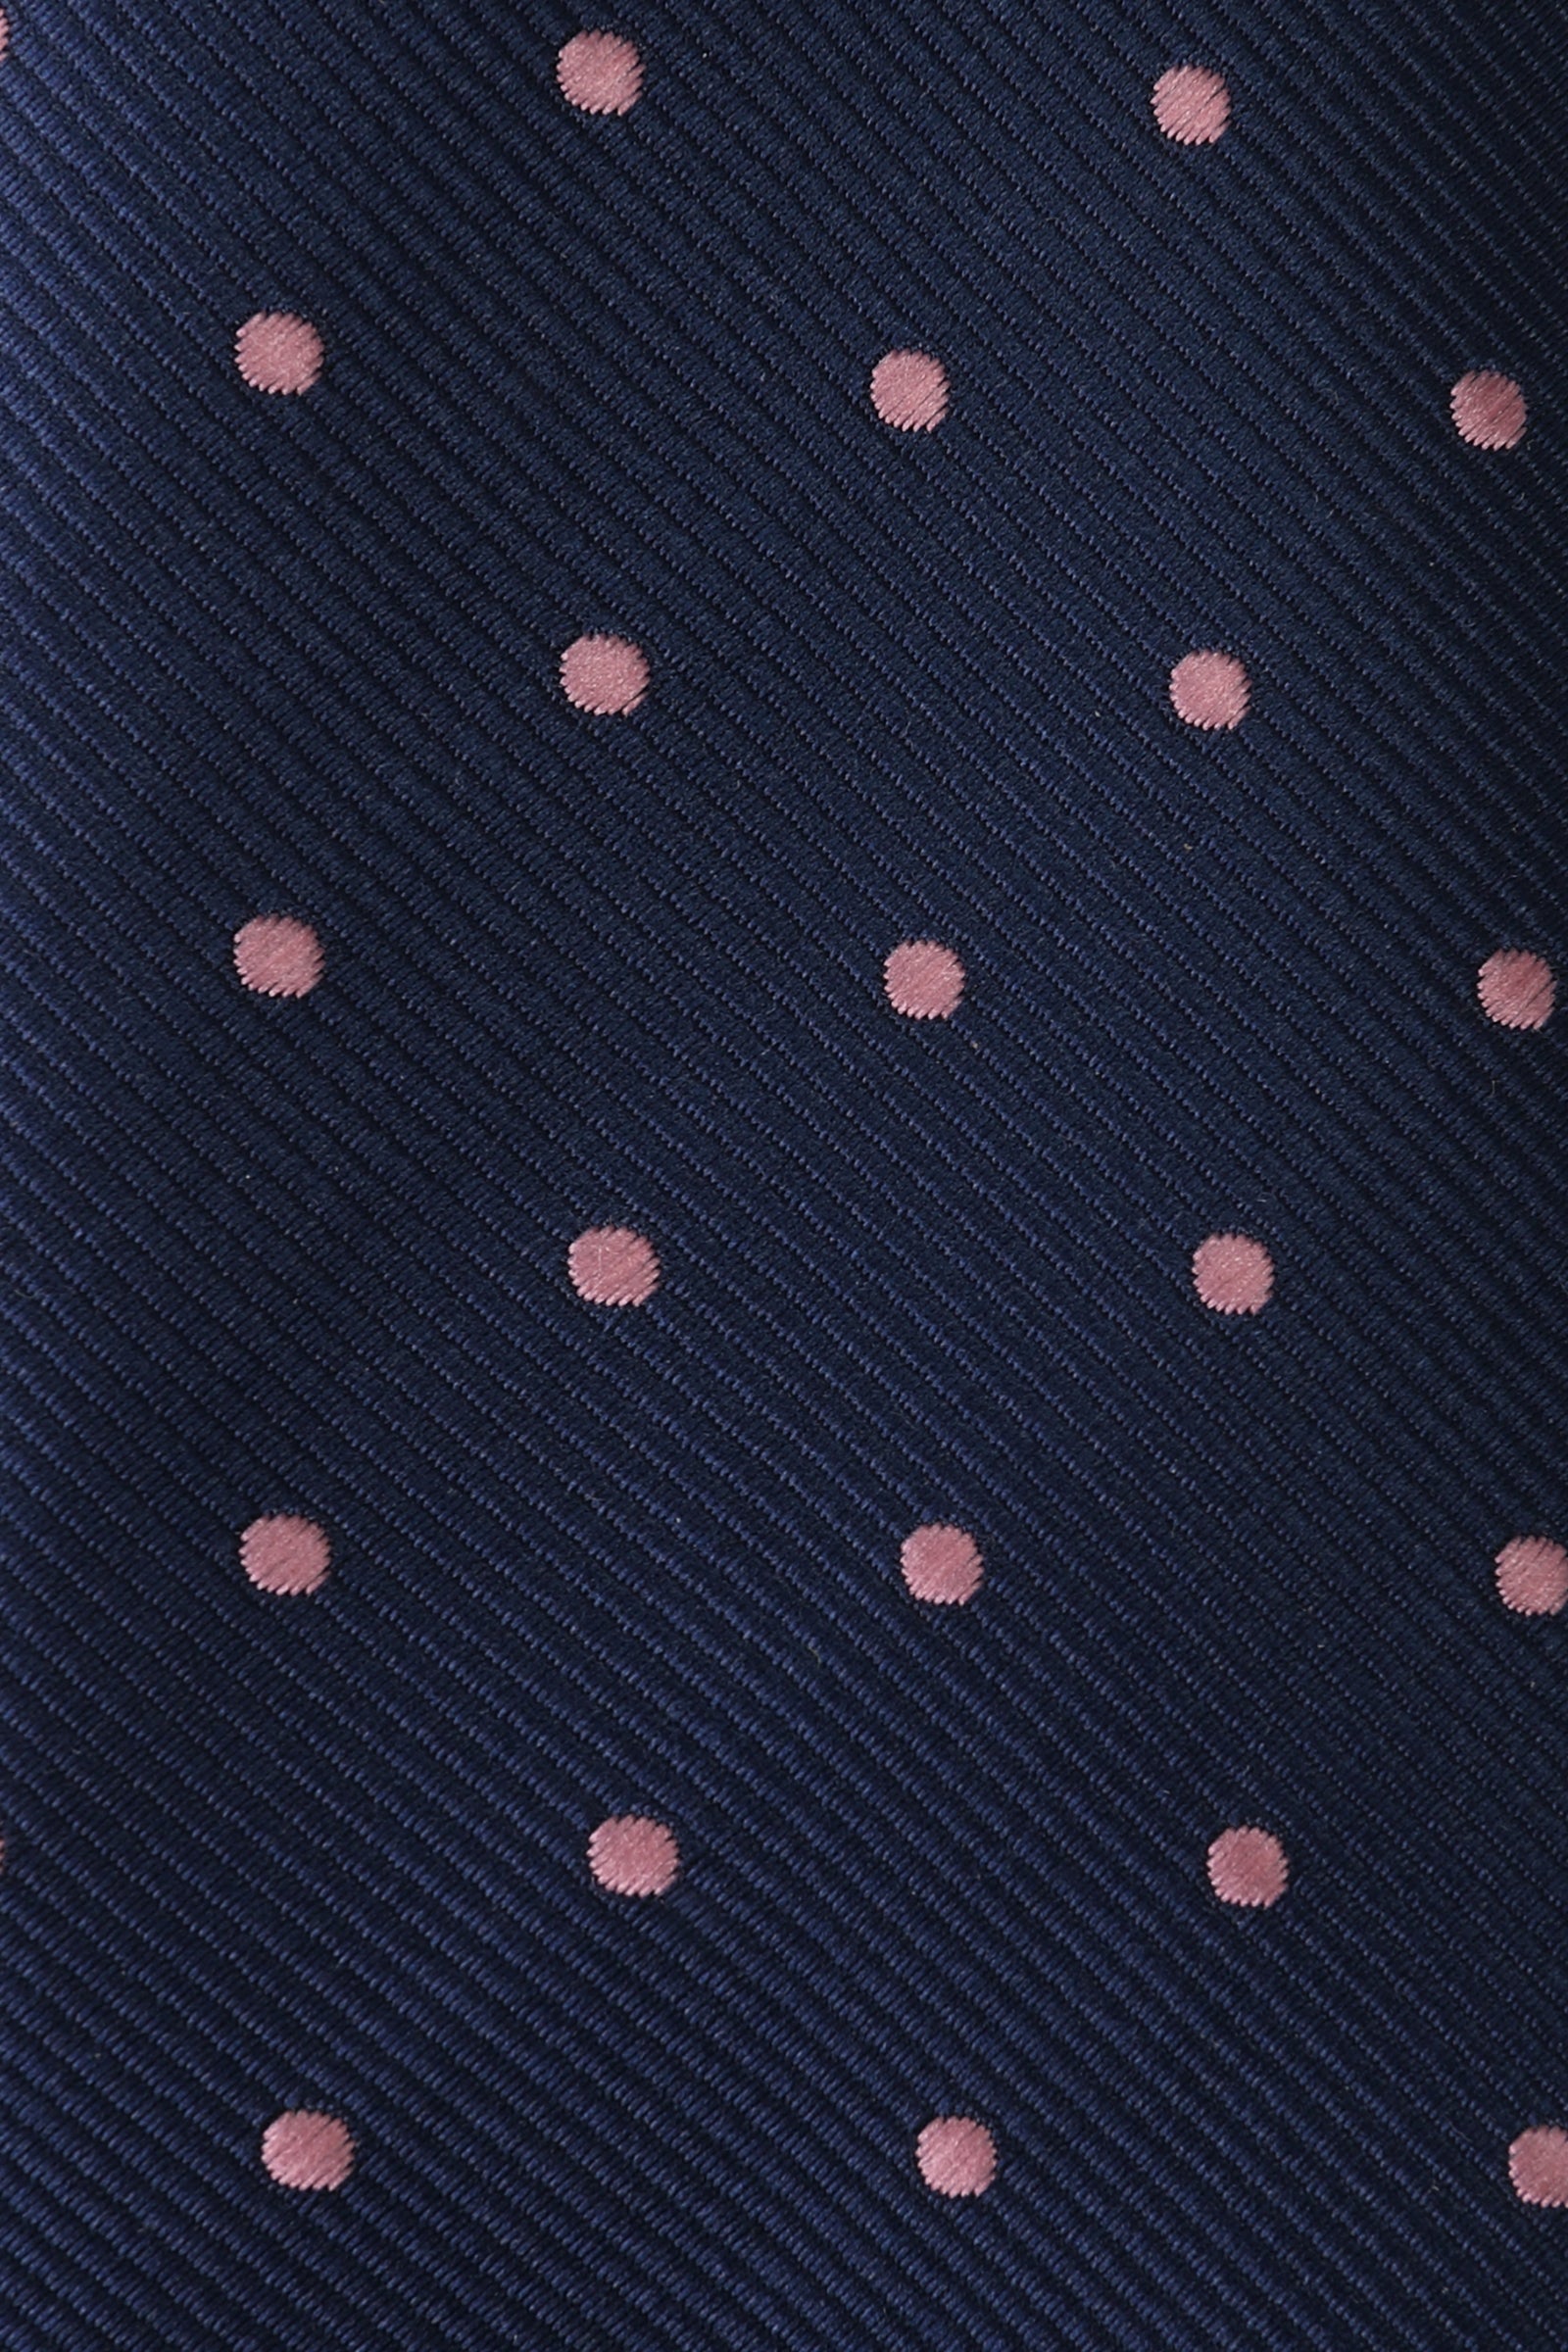 Navy Blue With Pink Polka Dots Kids Necktie Fabric